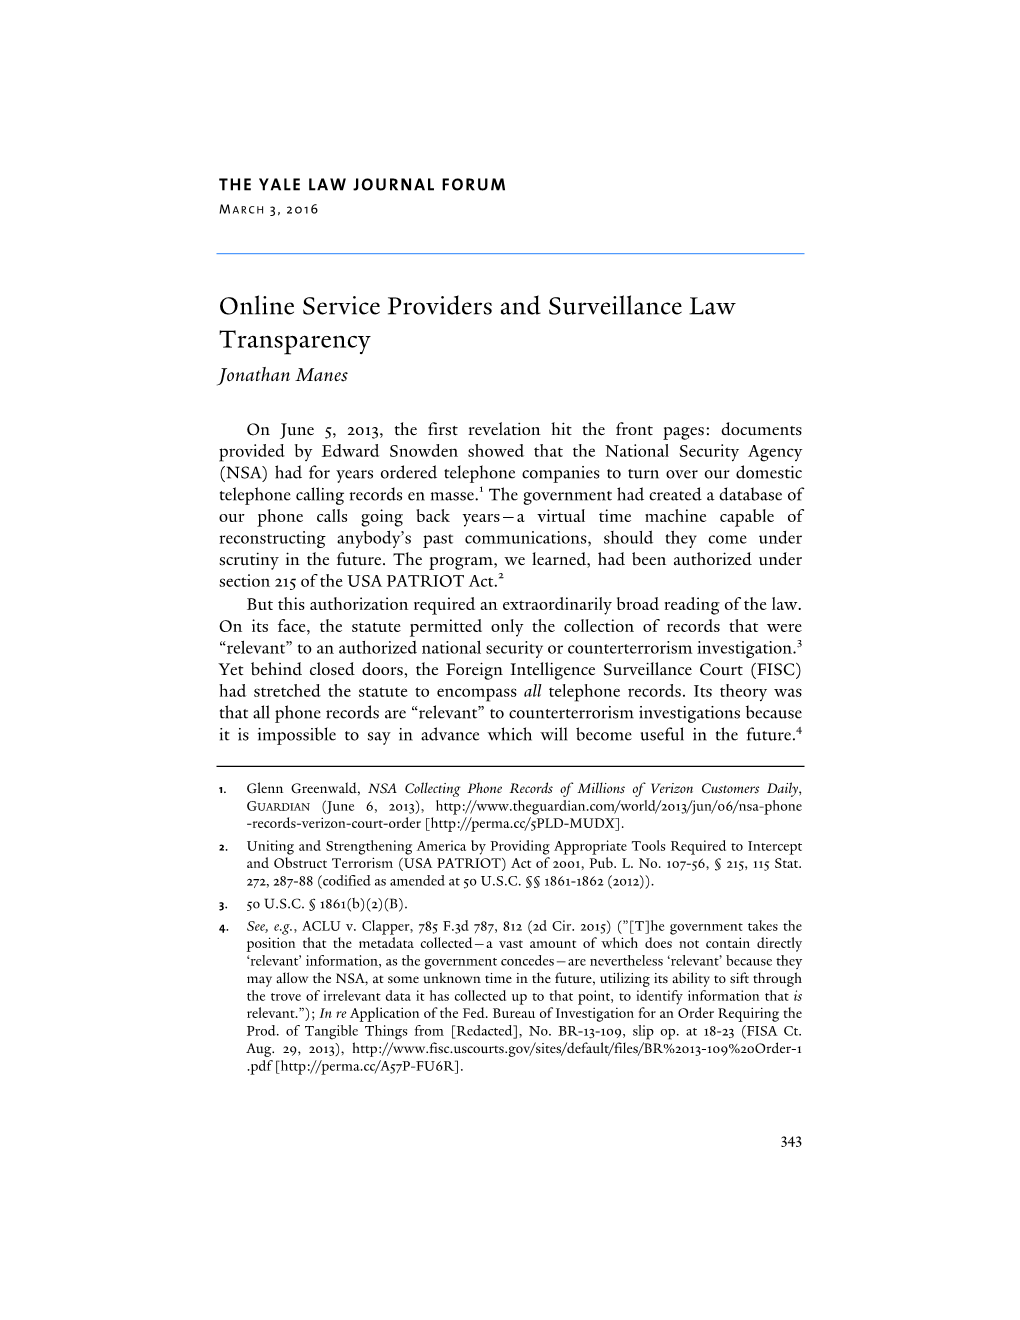 Online Service Providers and Surveillance Law Transparency Jonathan Manes